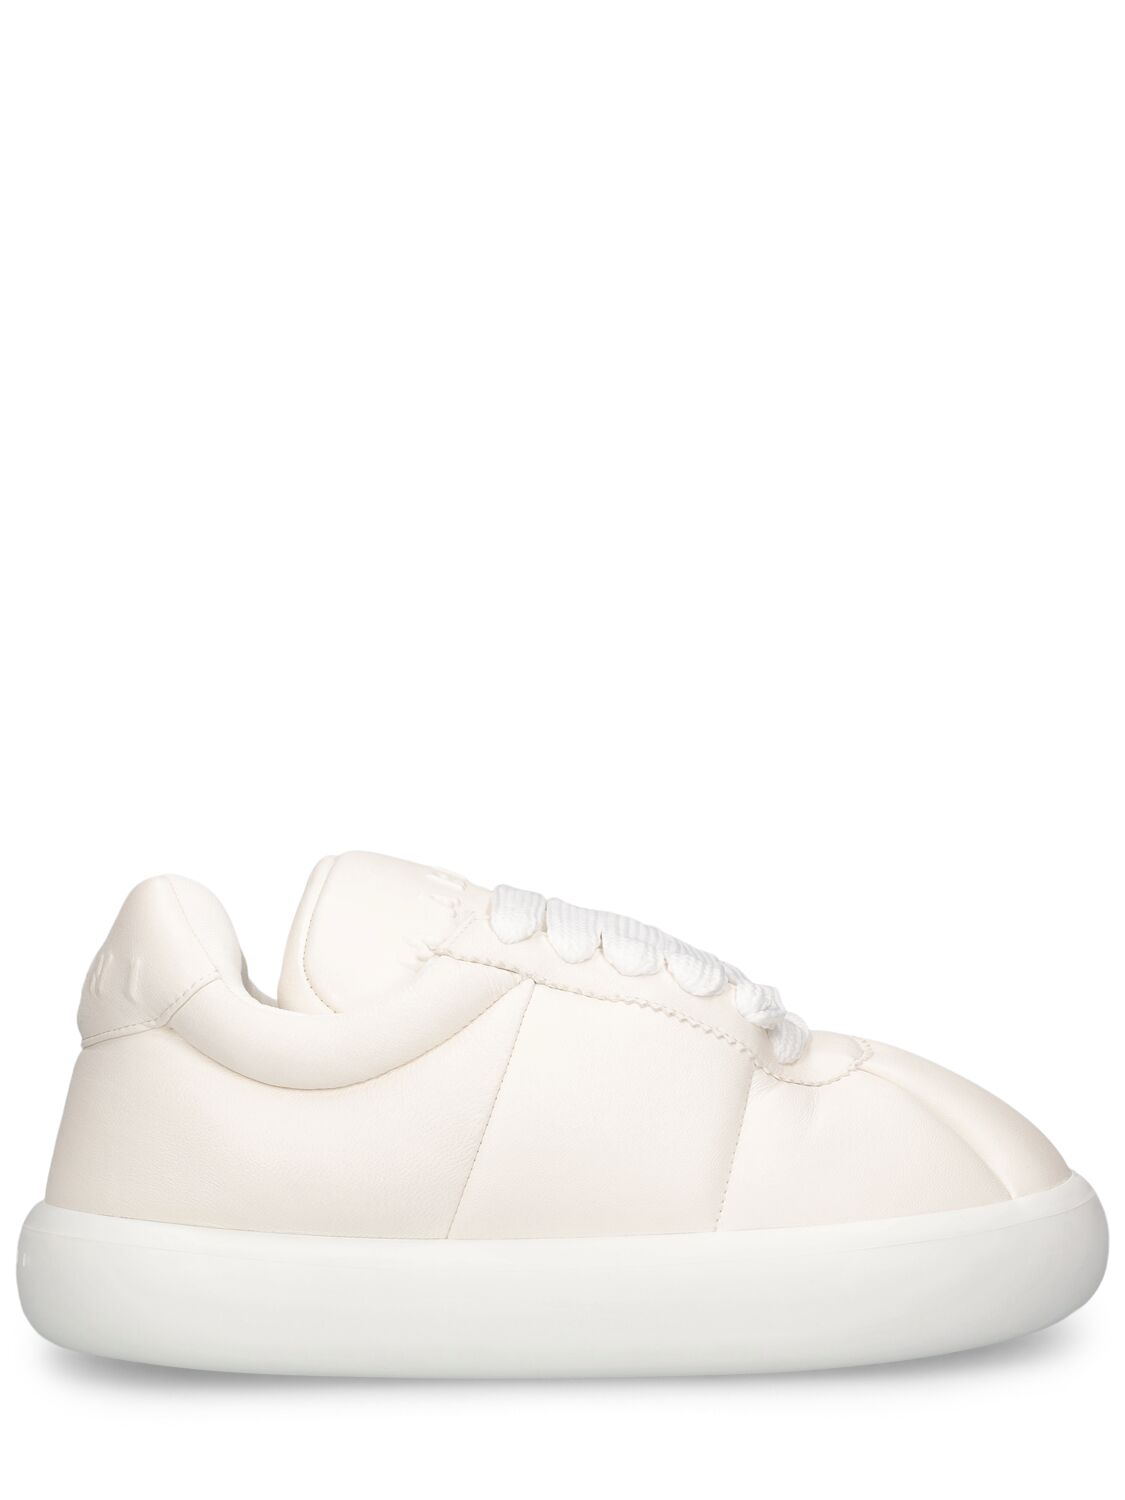 Image of Chunky Soft Leather Low Top Sneakers